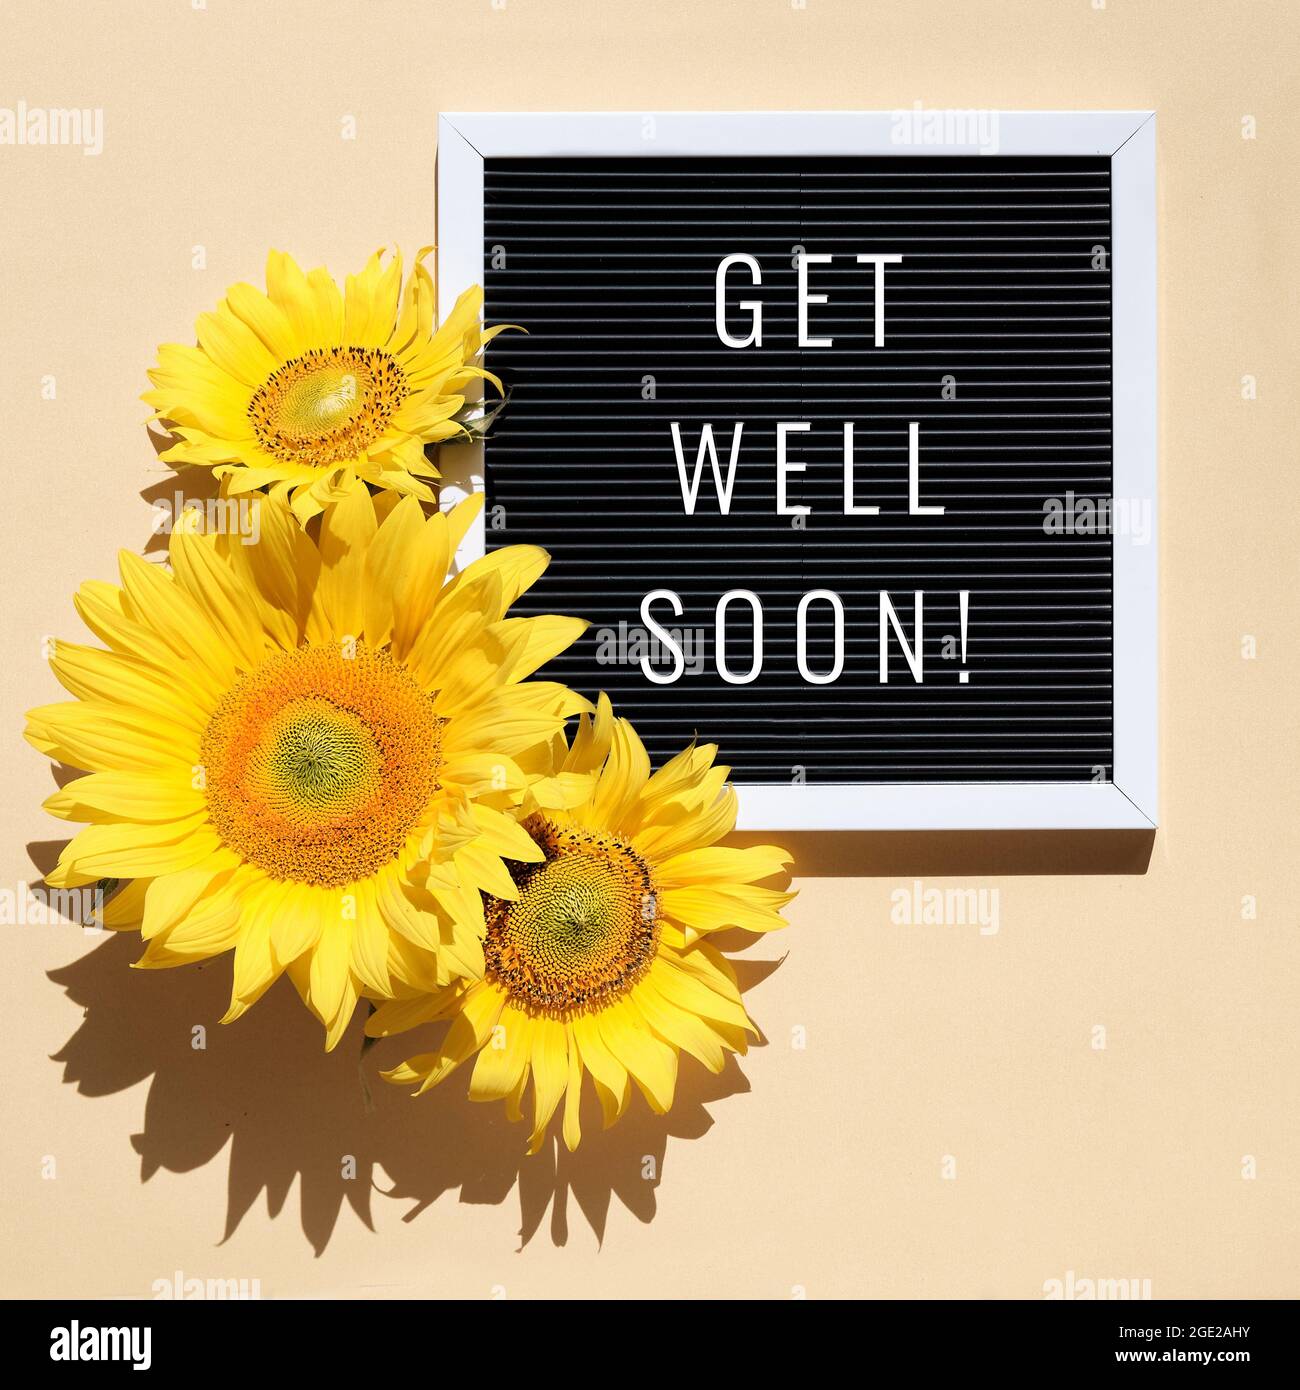 Get well soon, text on letter board with sunflowers. Flat lay with natural flowers and motivation message on black letterboard. Sunshine with long Stock Photo